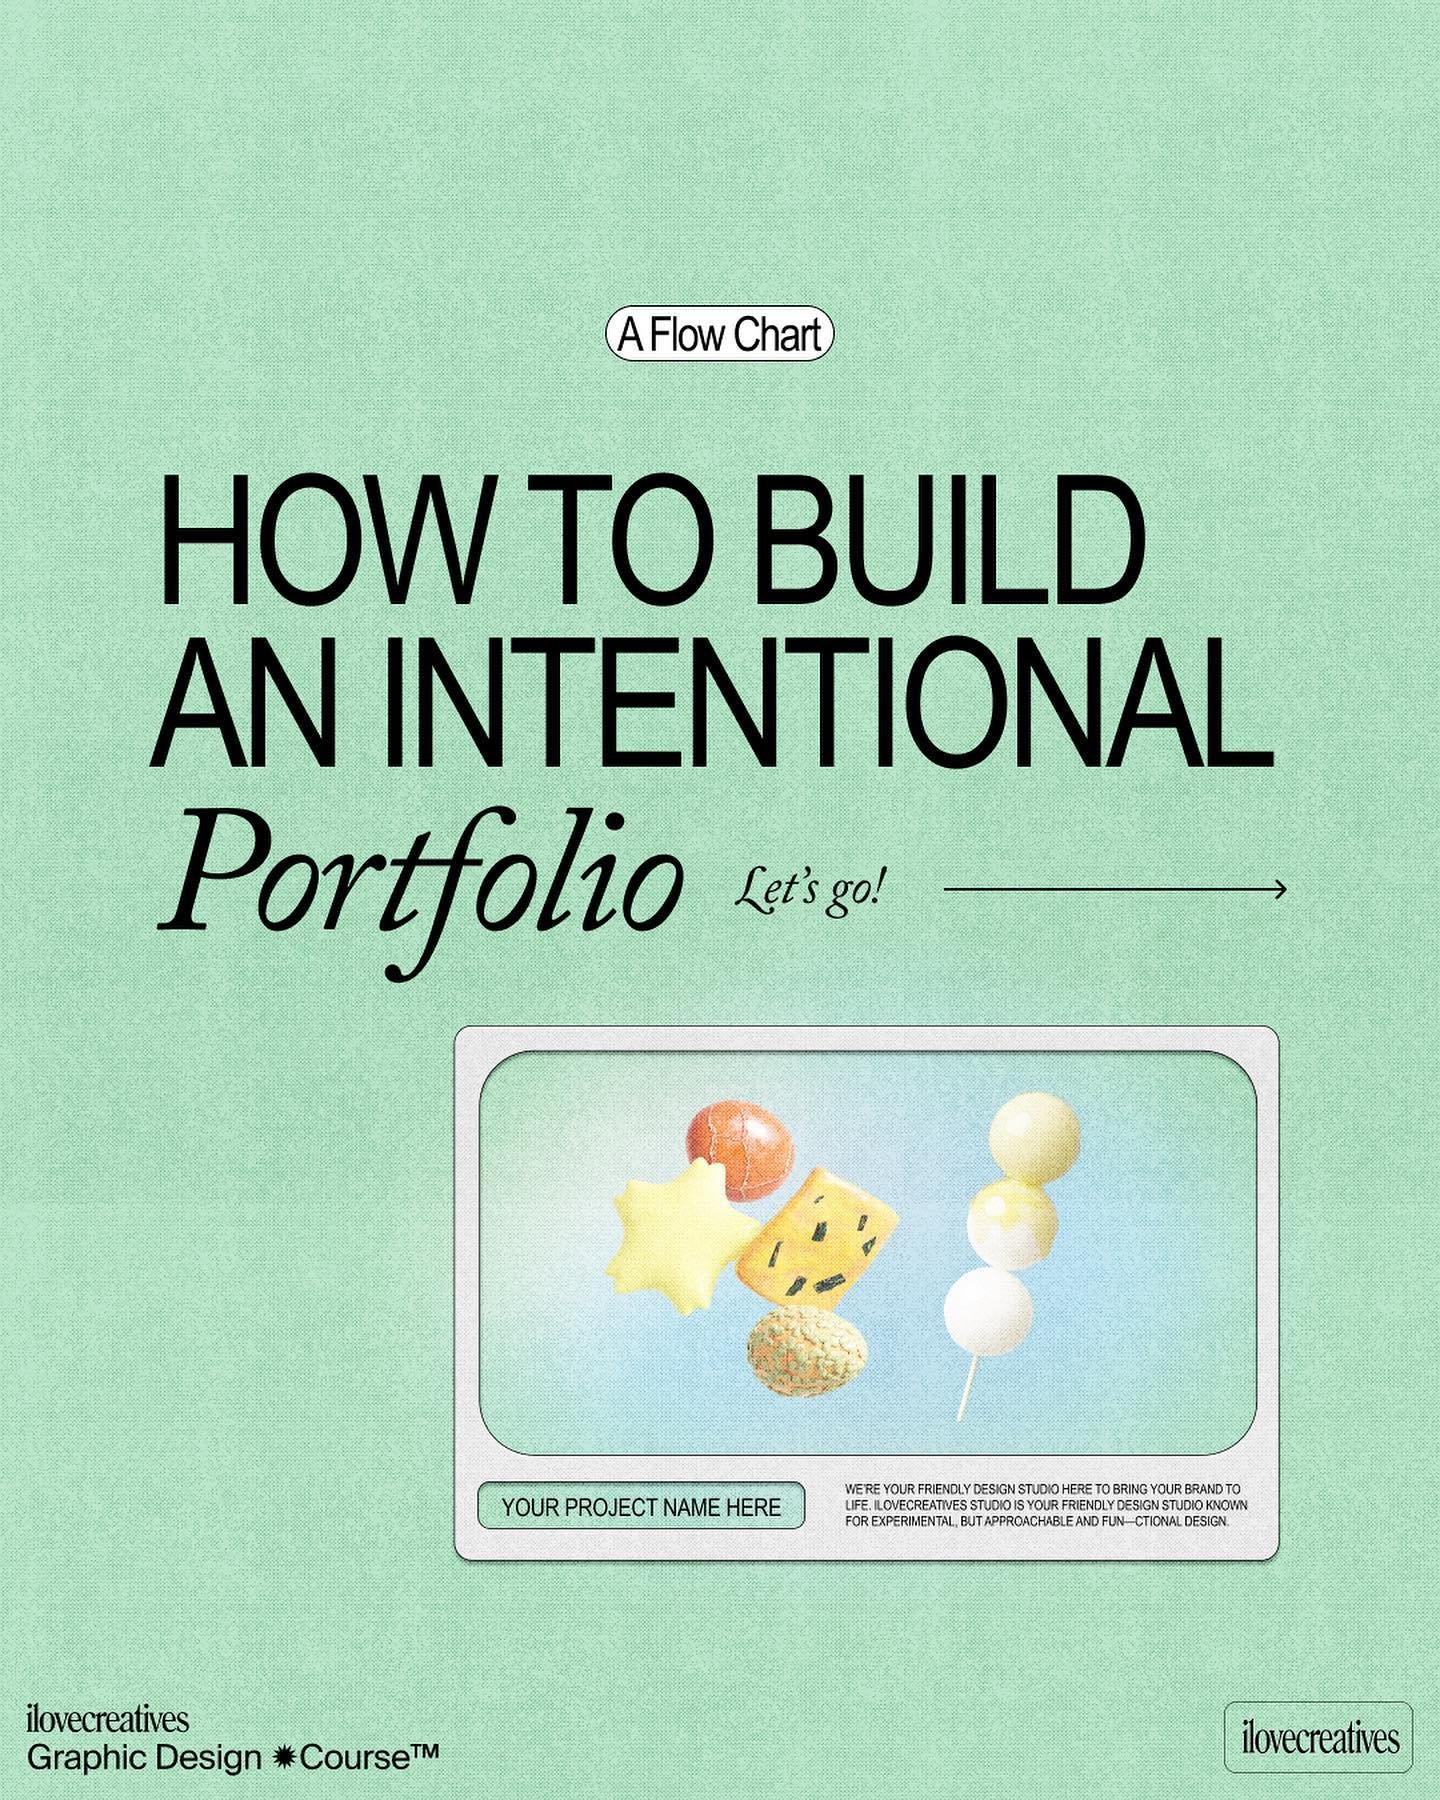 Stuck on what to include in your portfolio? Our designers at @ilovecreatives.studio offer some guidance for building a strong, intentional portfolio that aligns with your personal growth goals 🌻

You might feel inclined to put every single project i